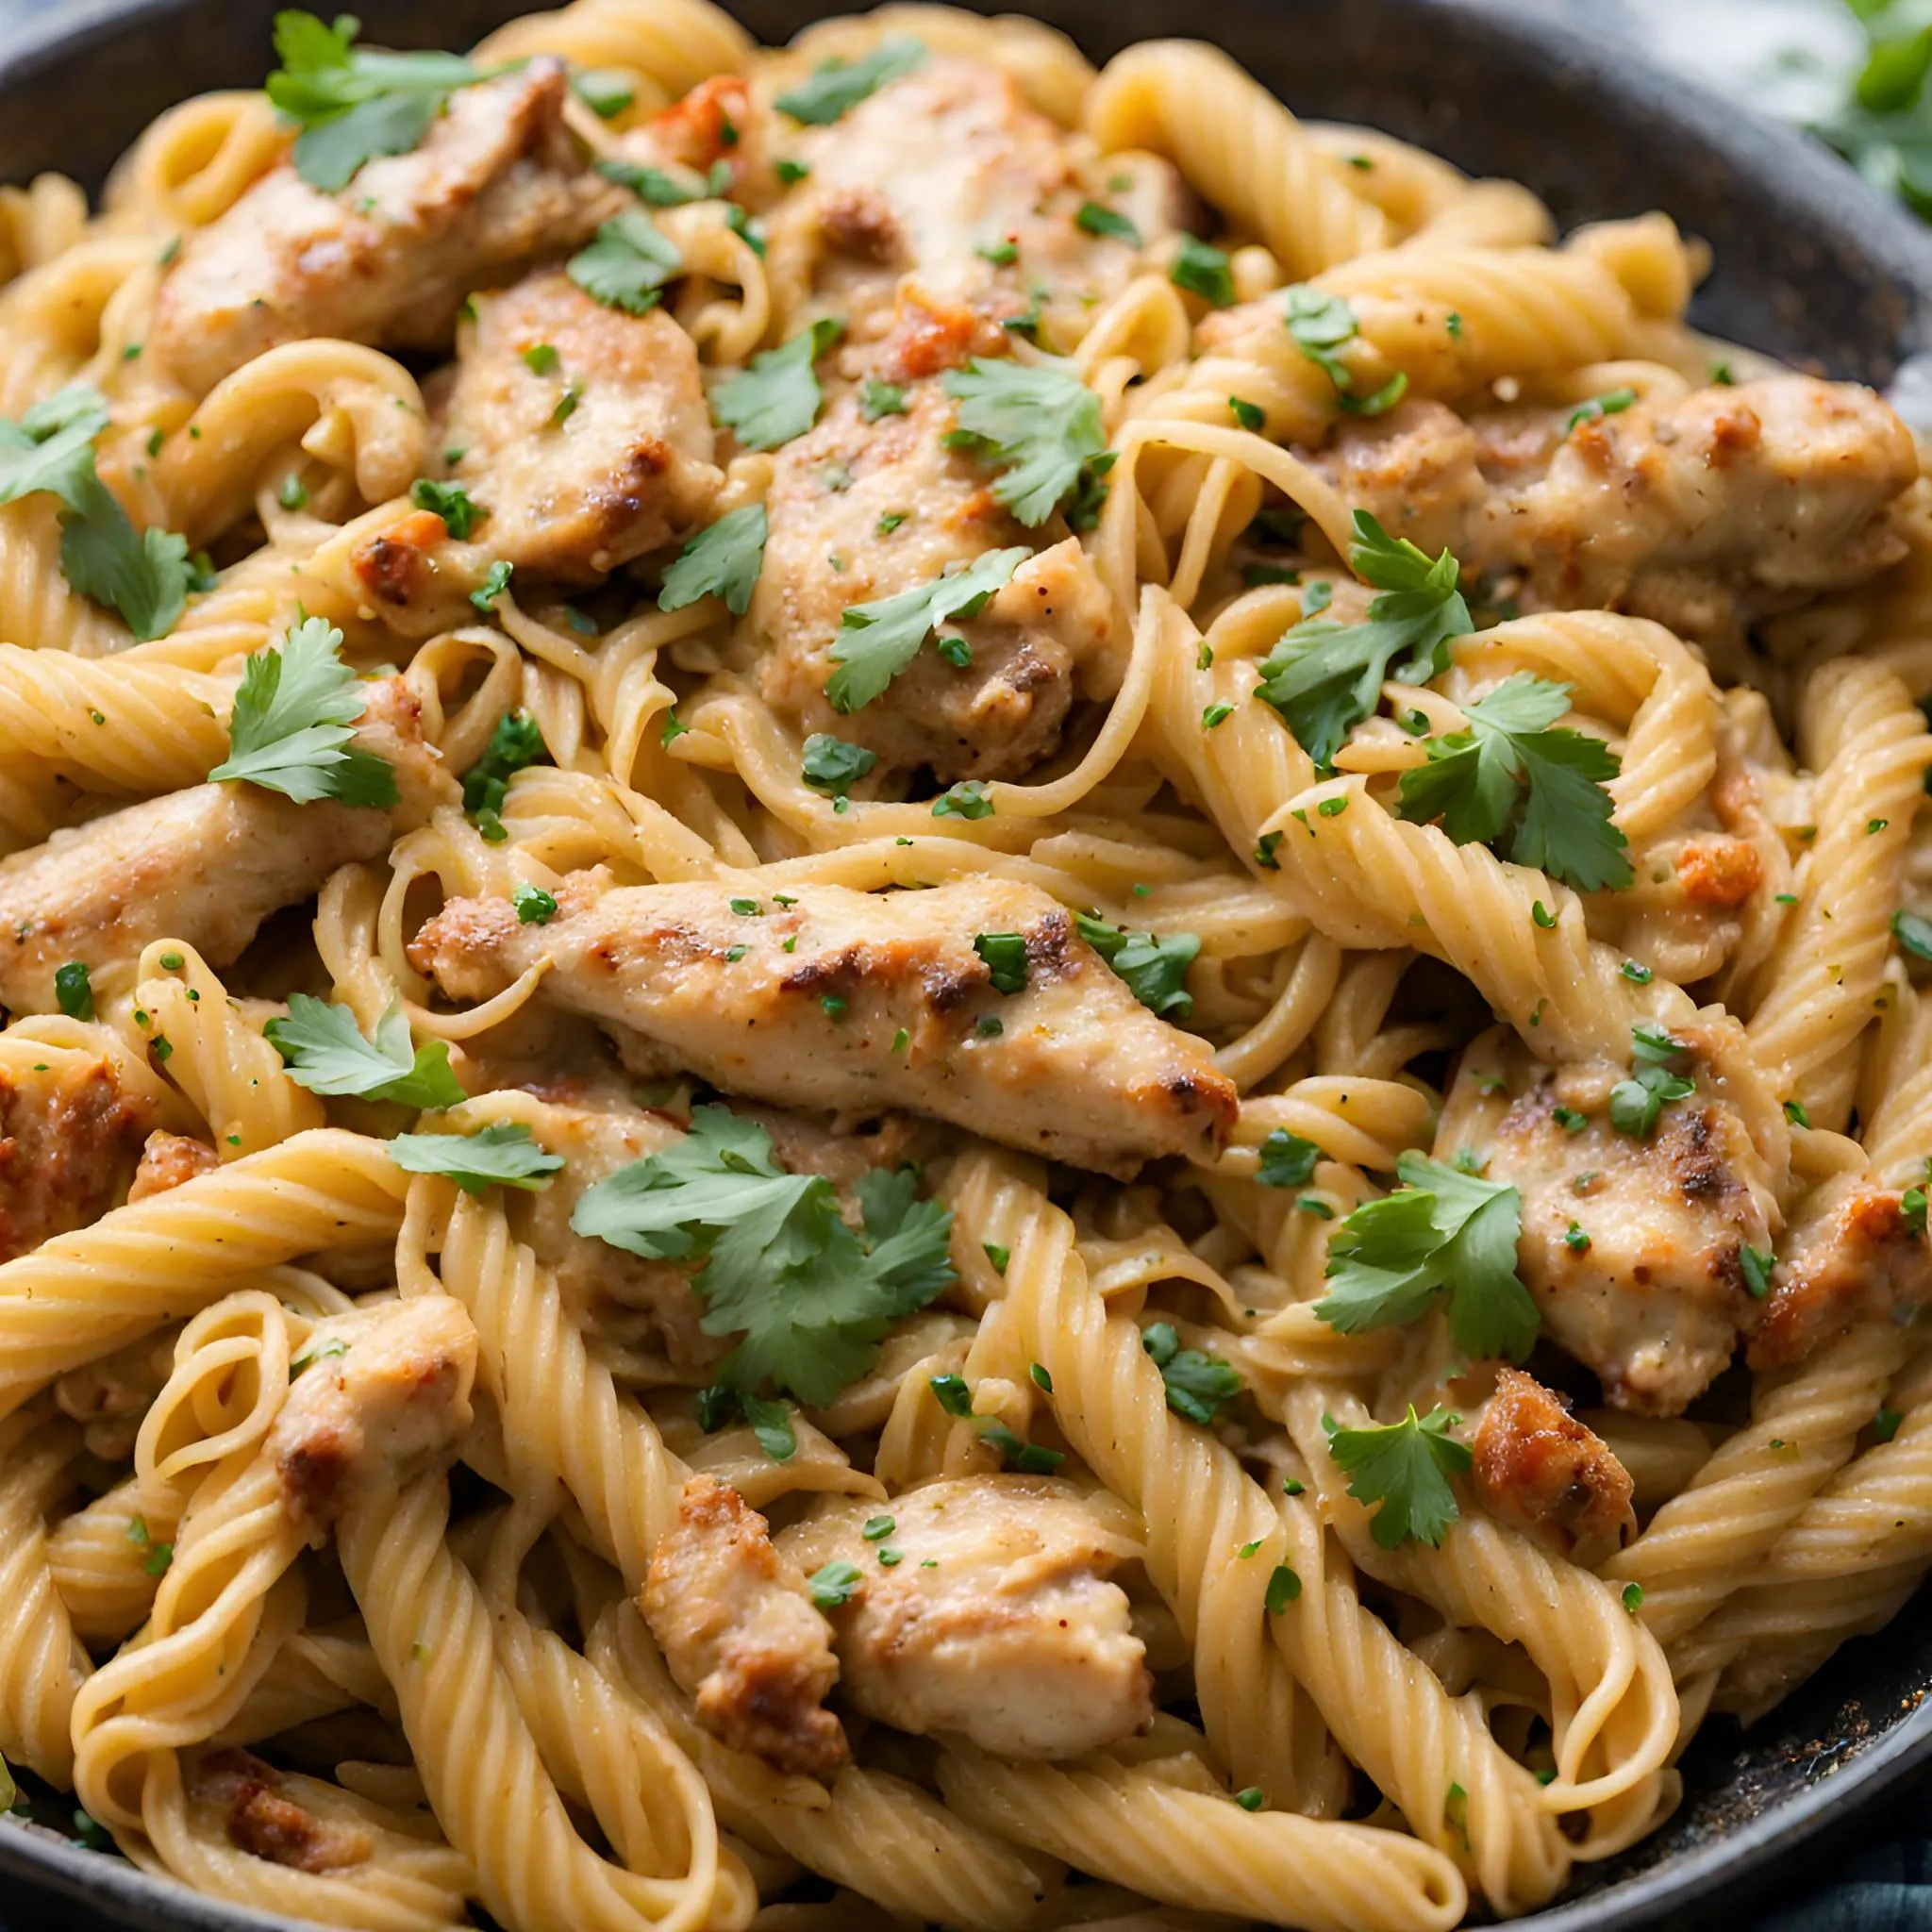 Close-up photo of a plate of chipotle chicken pasta, with roasted chicken, peppers, and onions tossed in a creamy chipotle sauce, topped with cilantro and grated parmesan cheese.